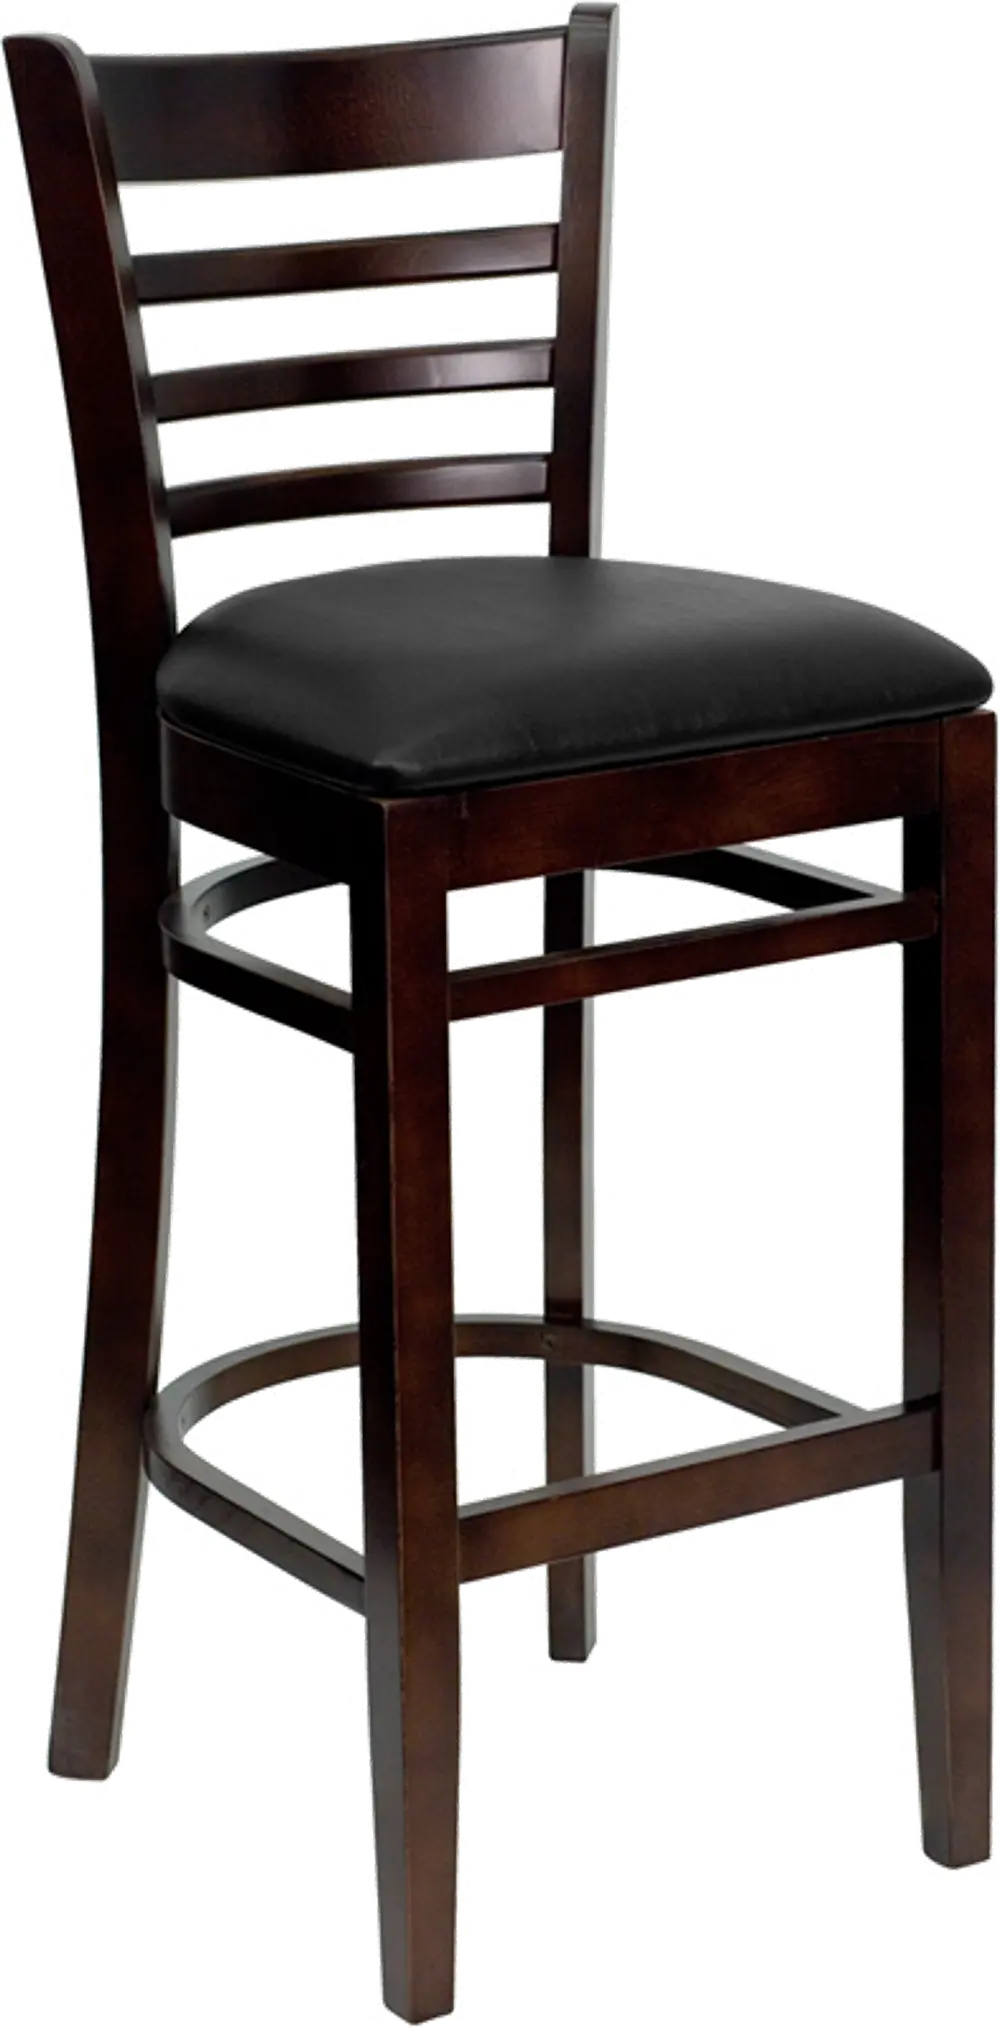 Brown and Black Upholstered Commercial Bar Stool - Ladderback-1